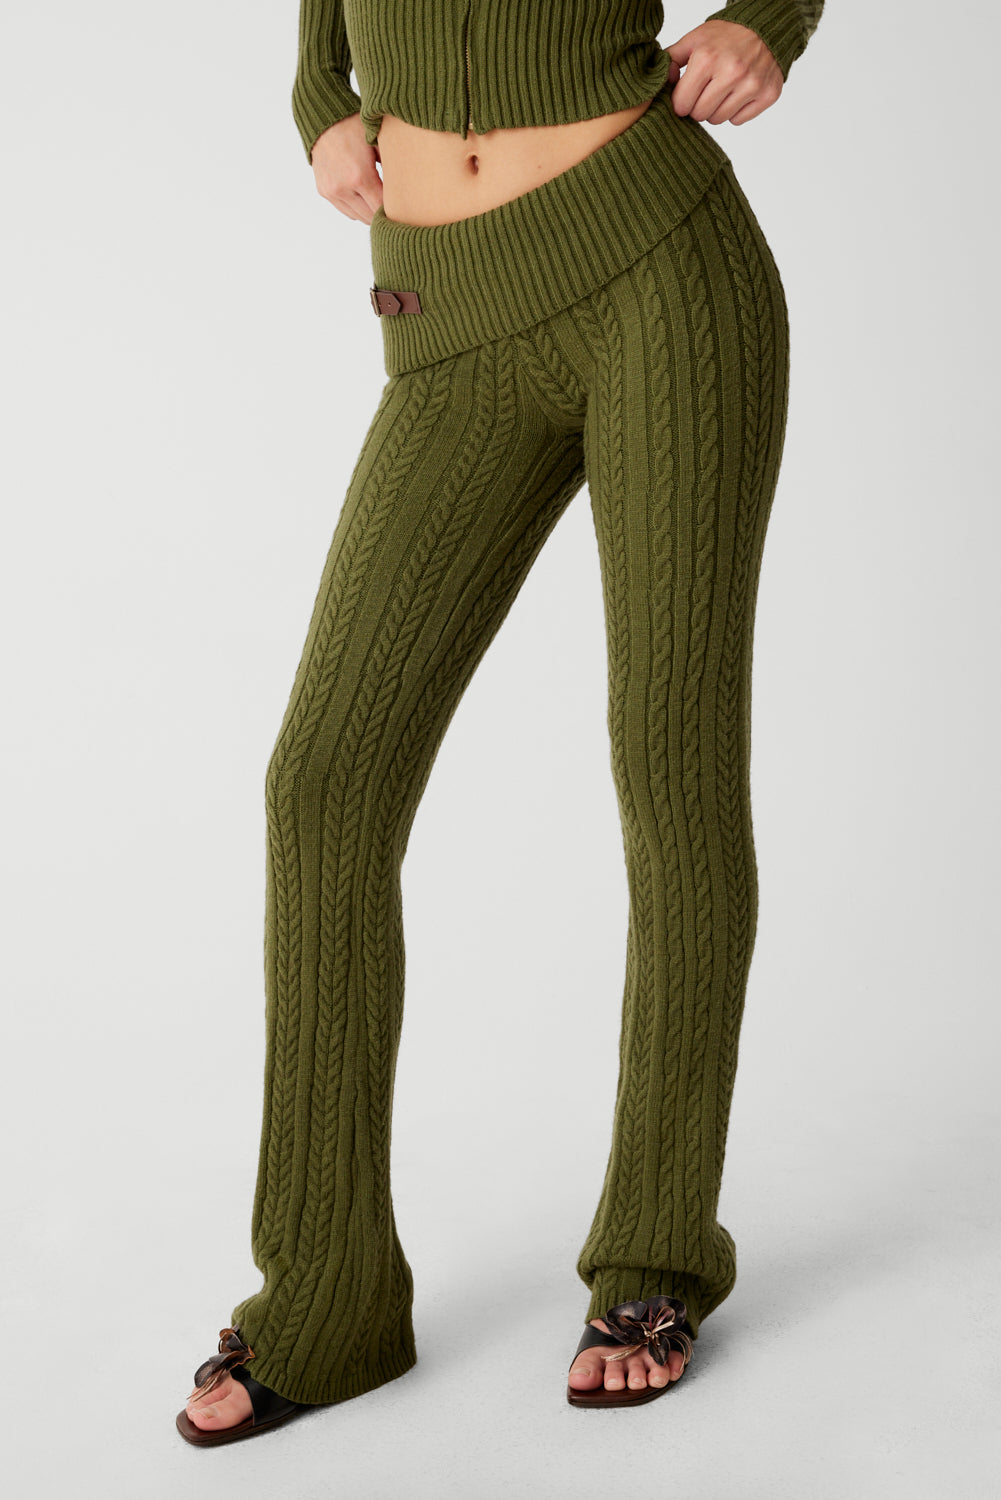 THE KNIT PANT